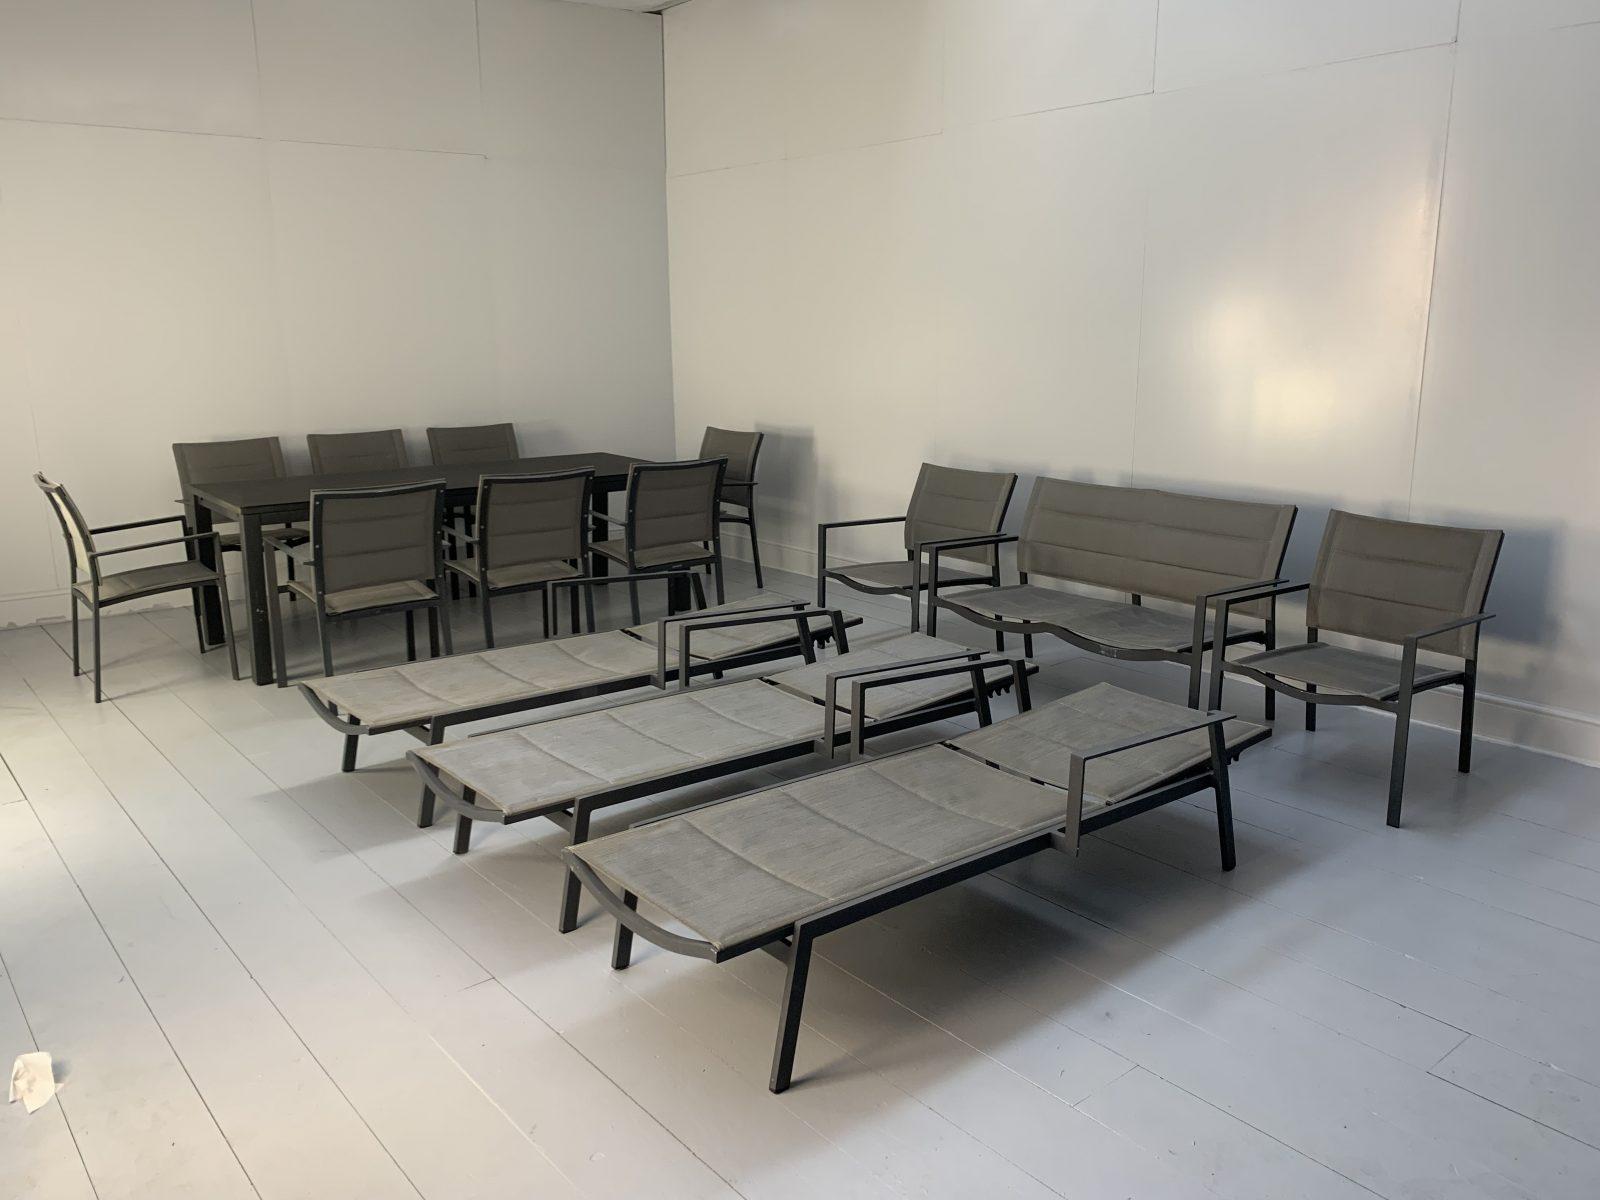 On offer on this occasion is one of the most handsome, modern suites of outdoor/dining furniture you could hope to find.

This is an ultra-rare opportunity to acquire what is, unequivocally, the best of the best, it being a most spectacular,